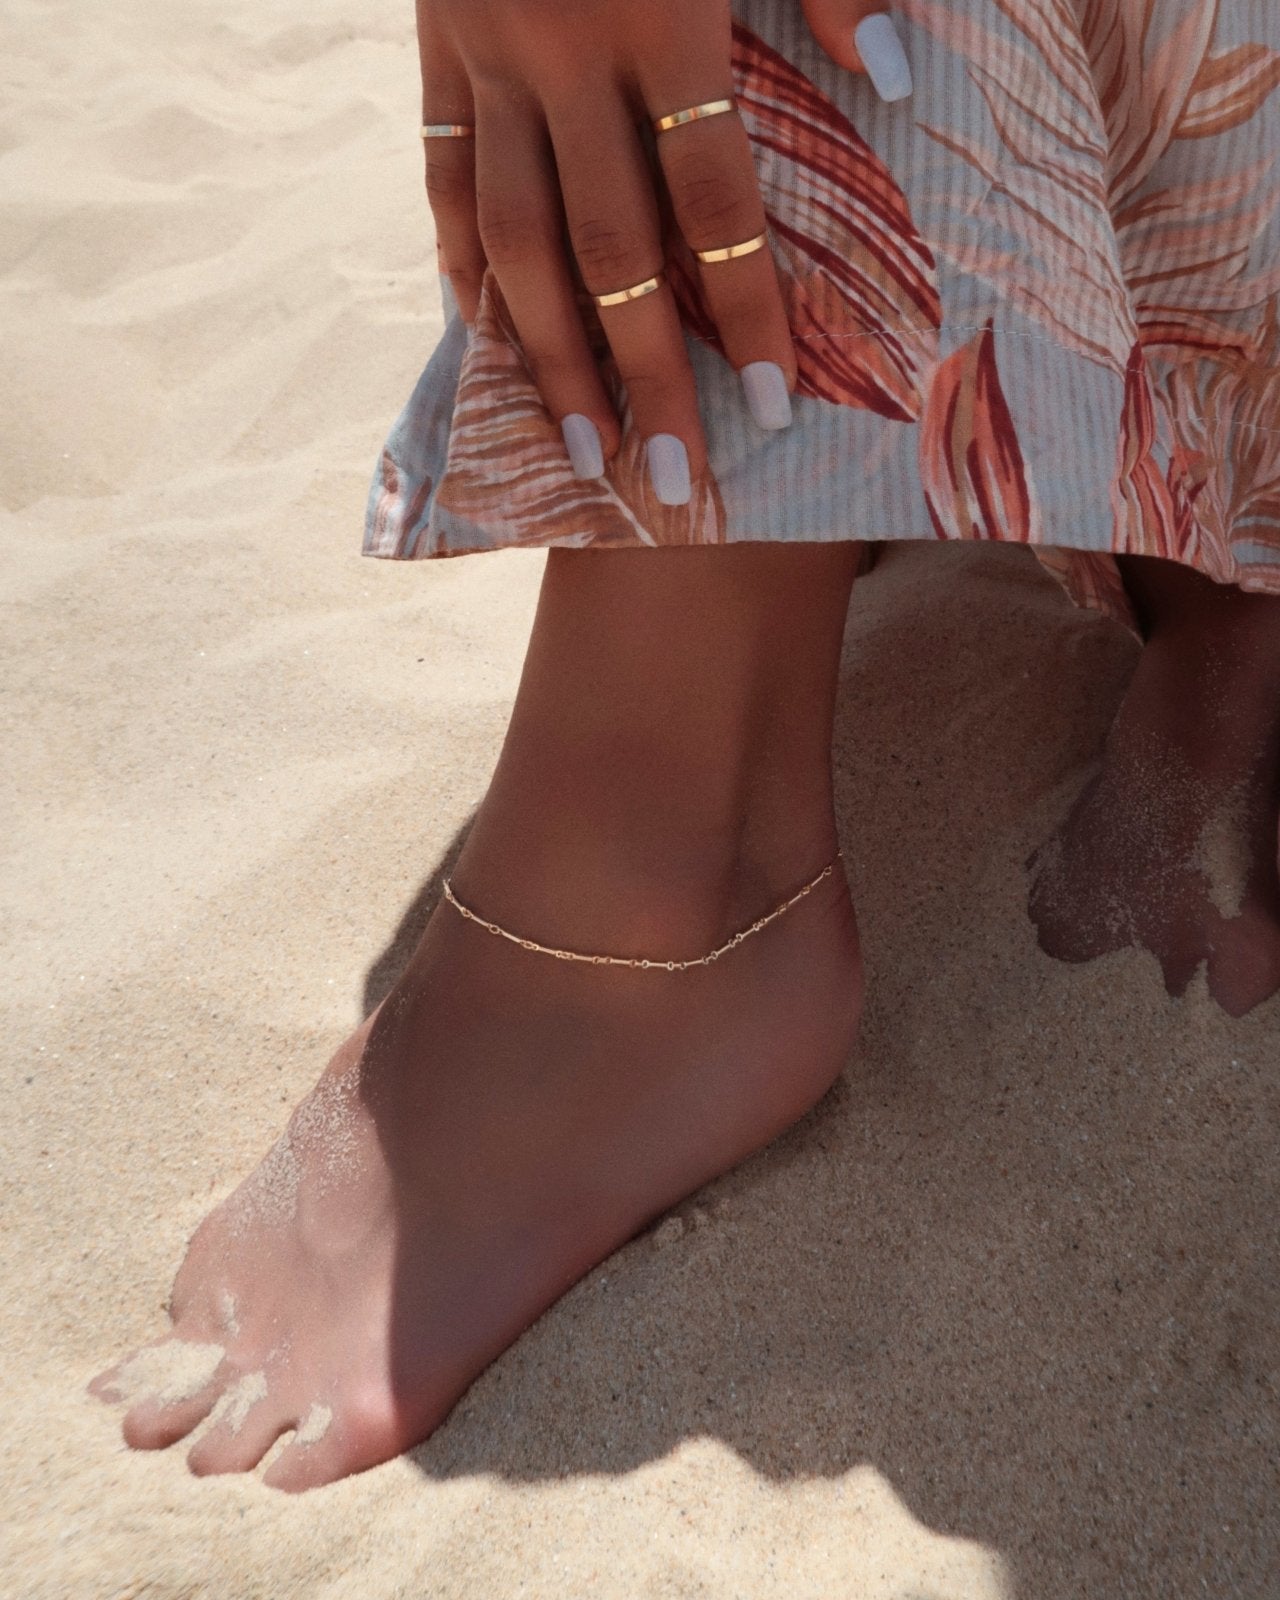 BAR CHAIN ANKLET - The Littl - 14k Yellow Gold Fill -